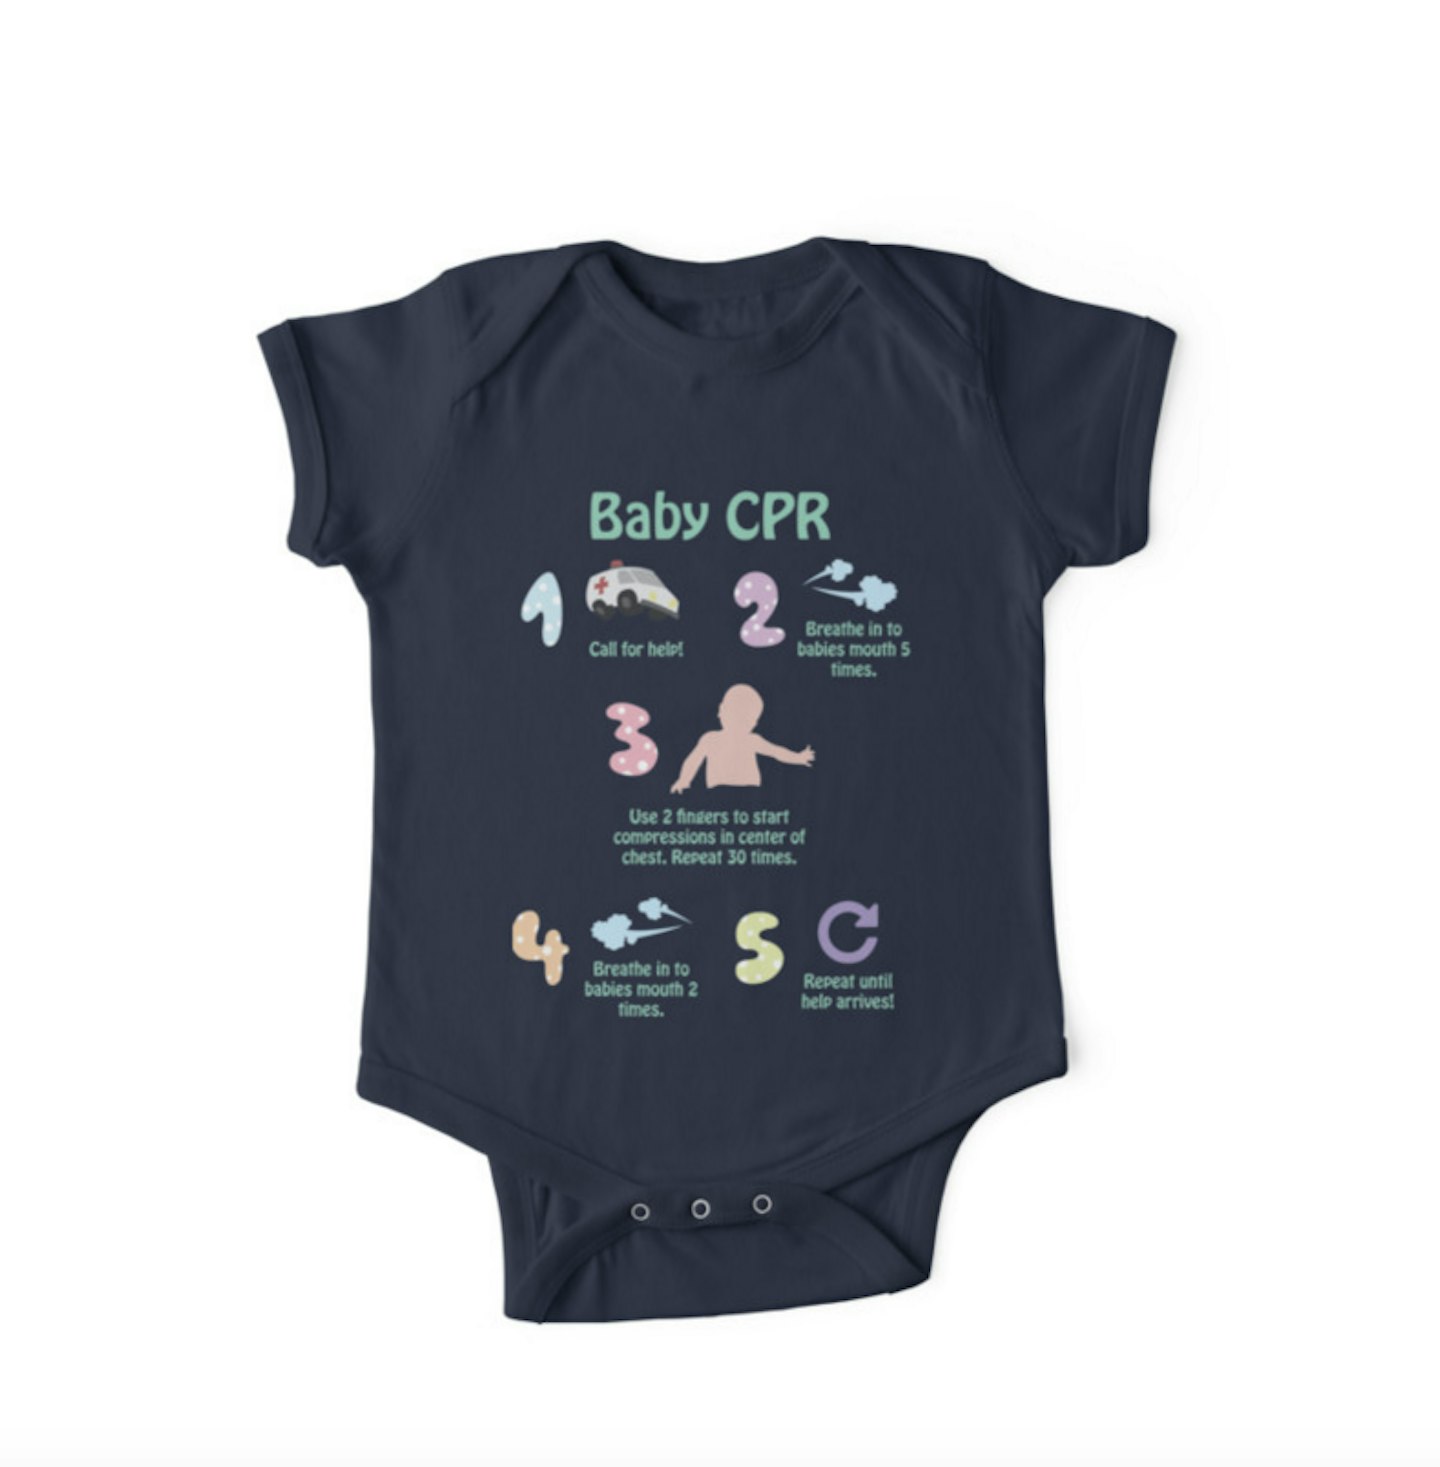 CPR baby grow